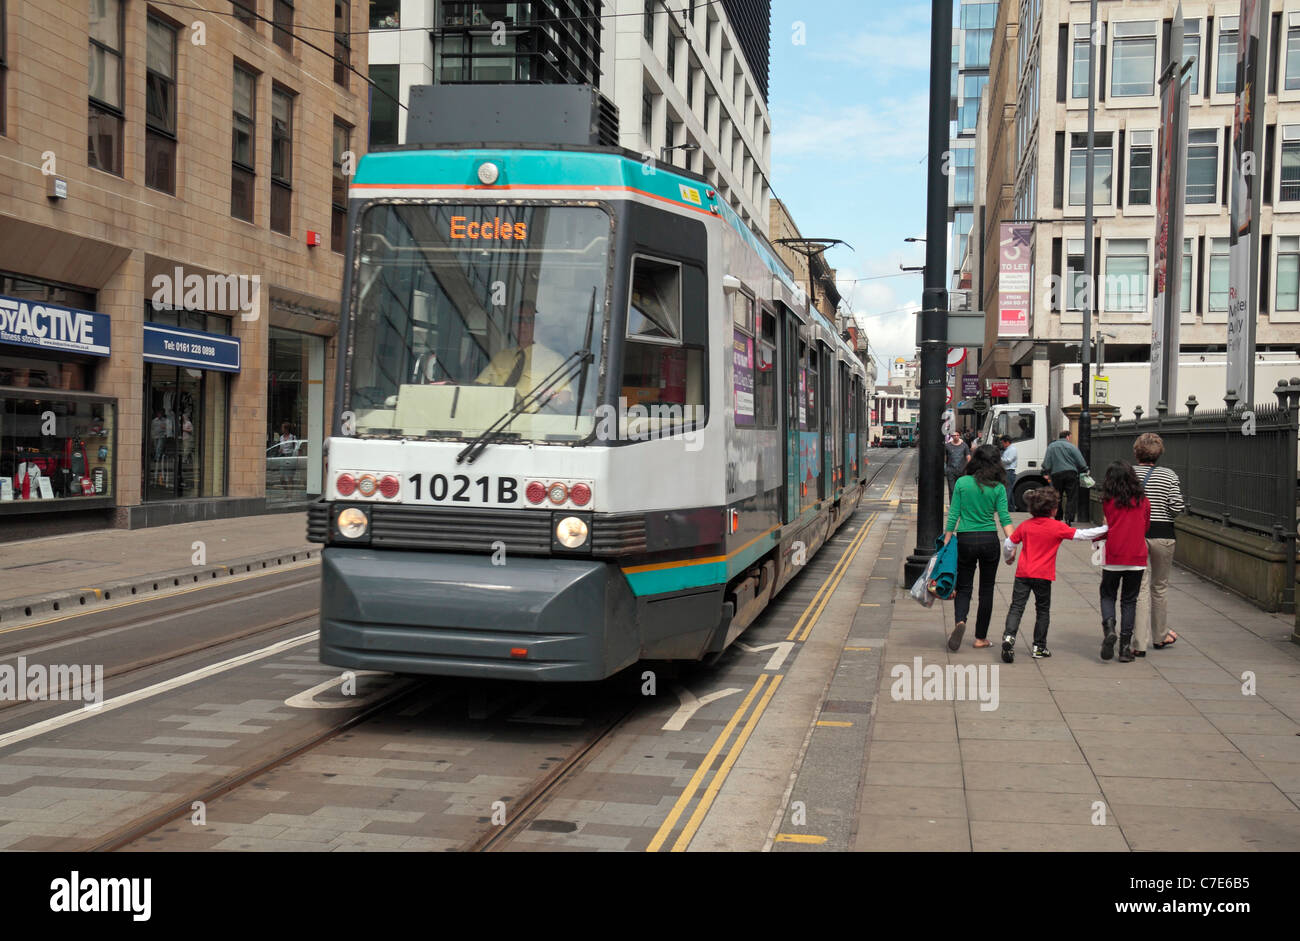 A Manchester Metrolink tram moving over a 'Tram Only' sign on the road in Manchester, UK.  (Slight movement blur on tram) Stock Photo